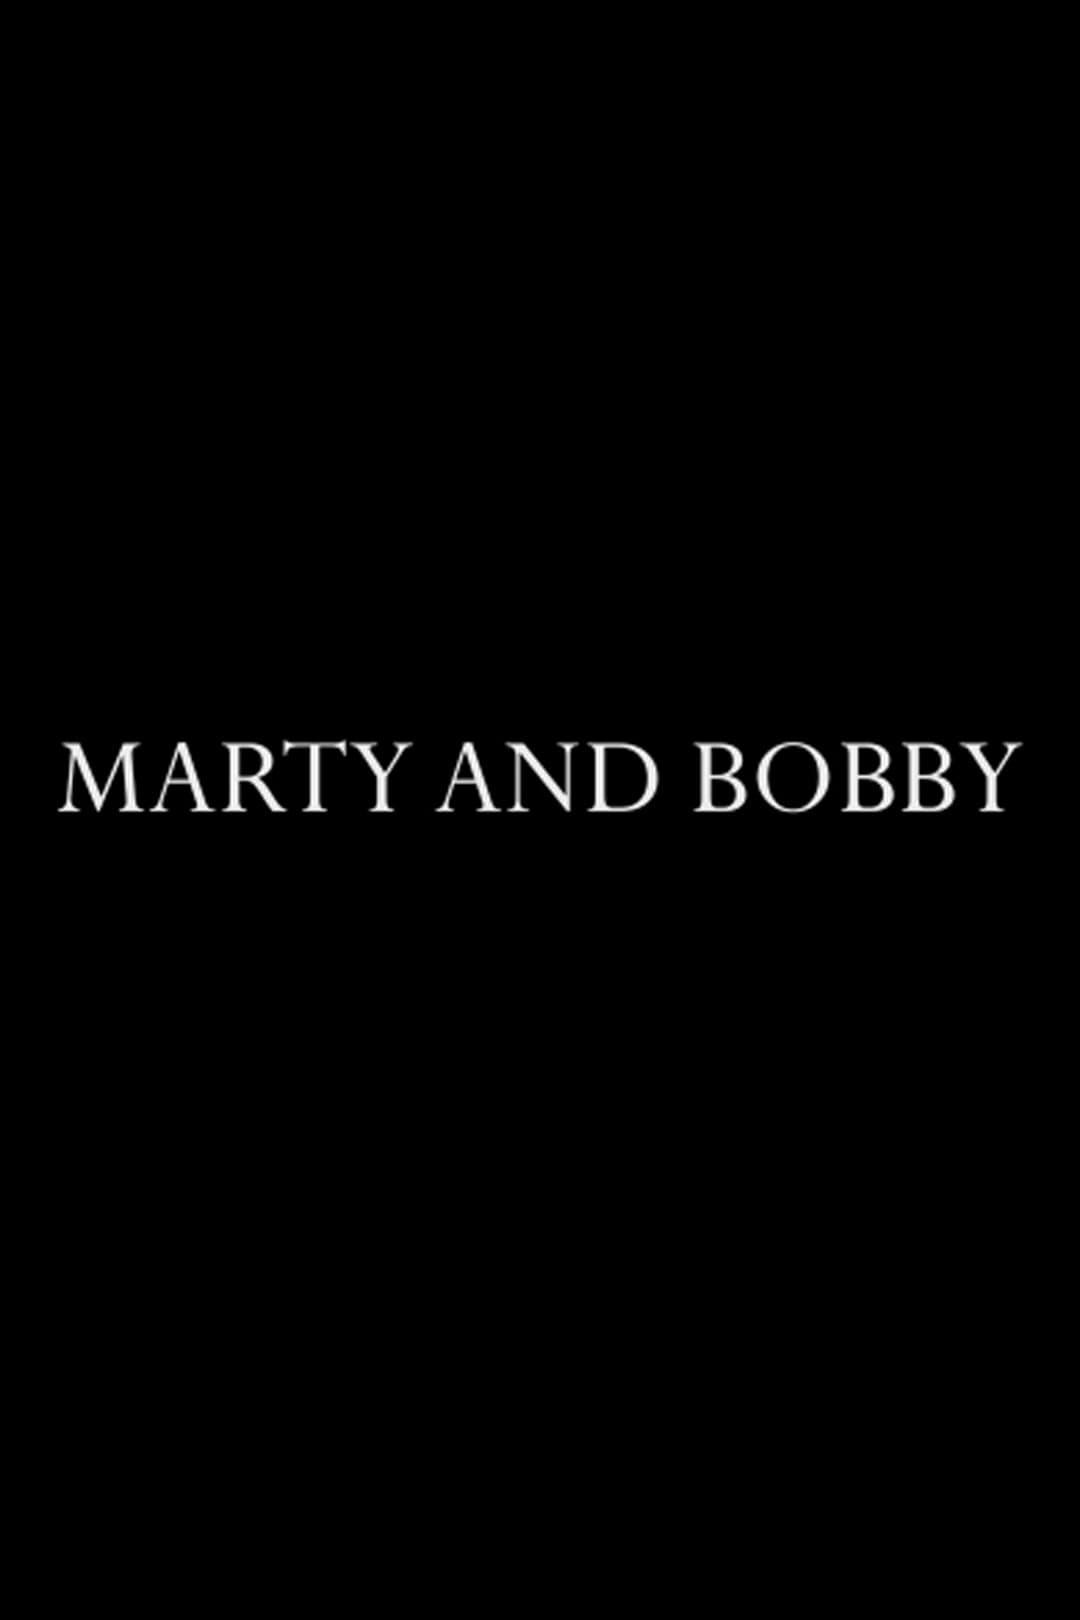 Marty and Bobby poster